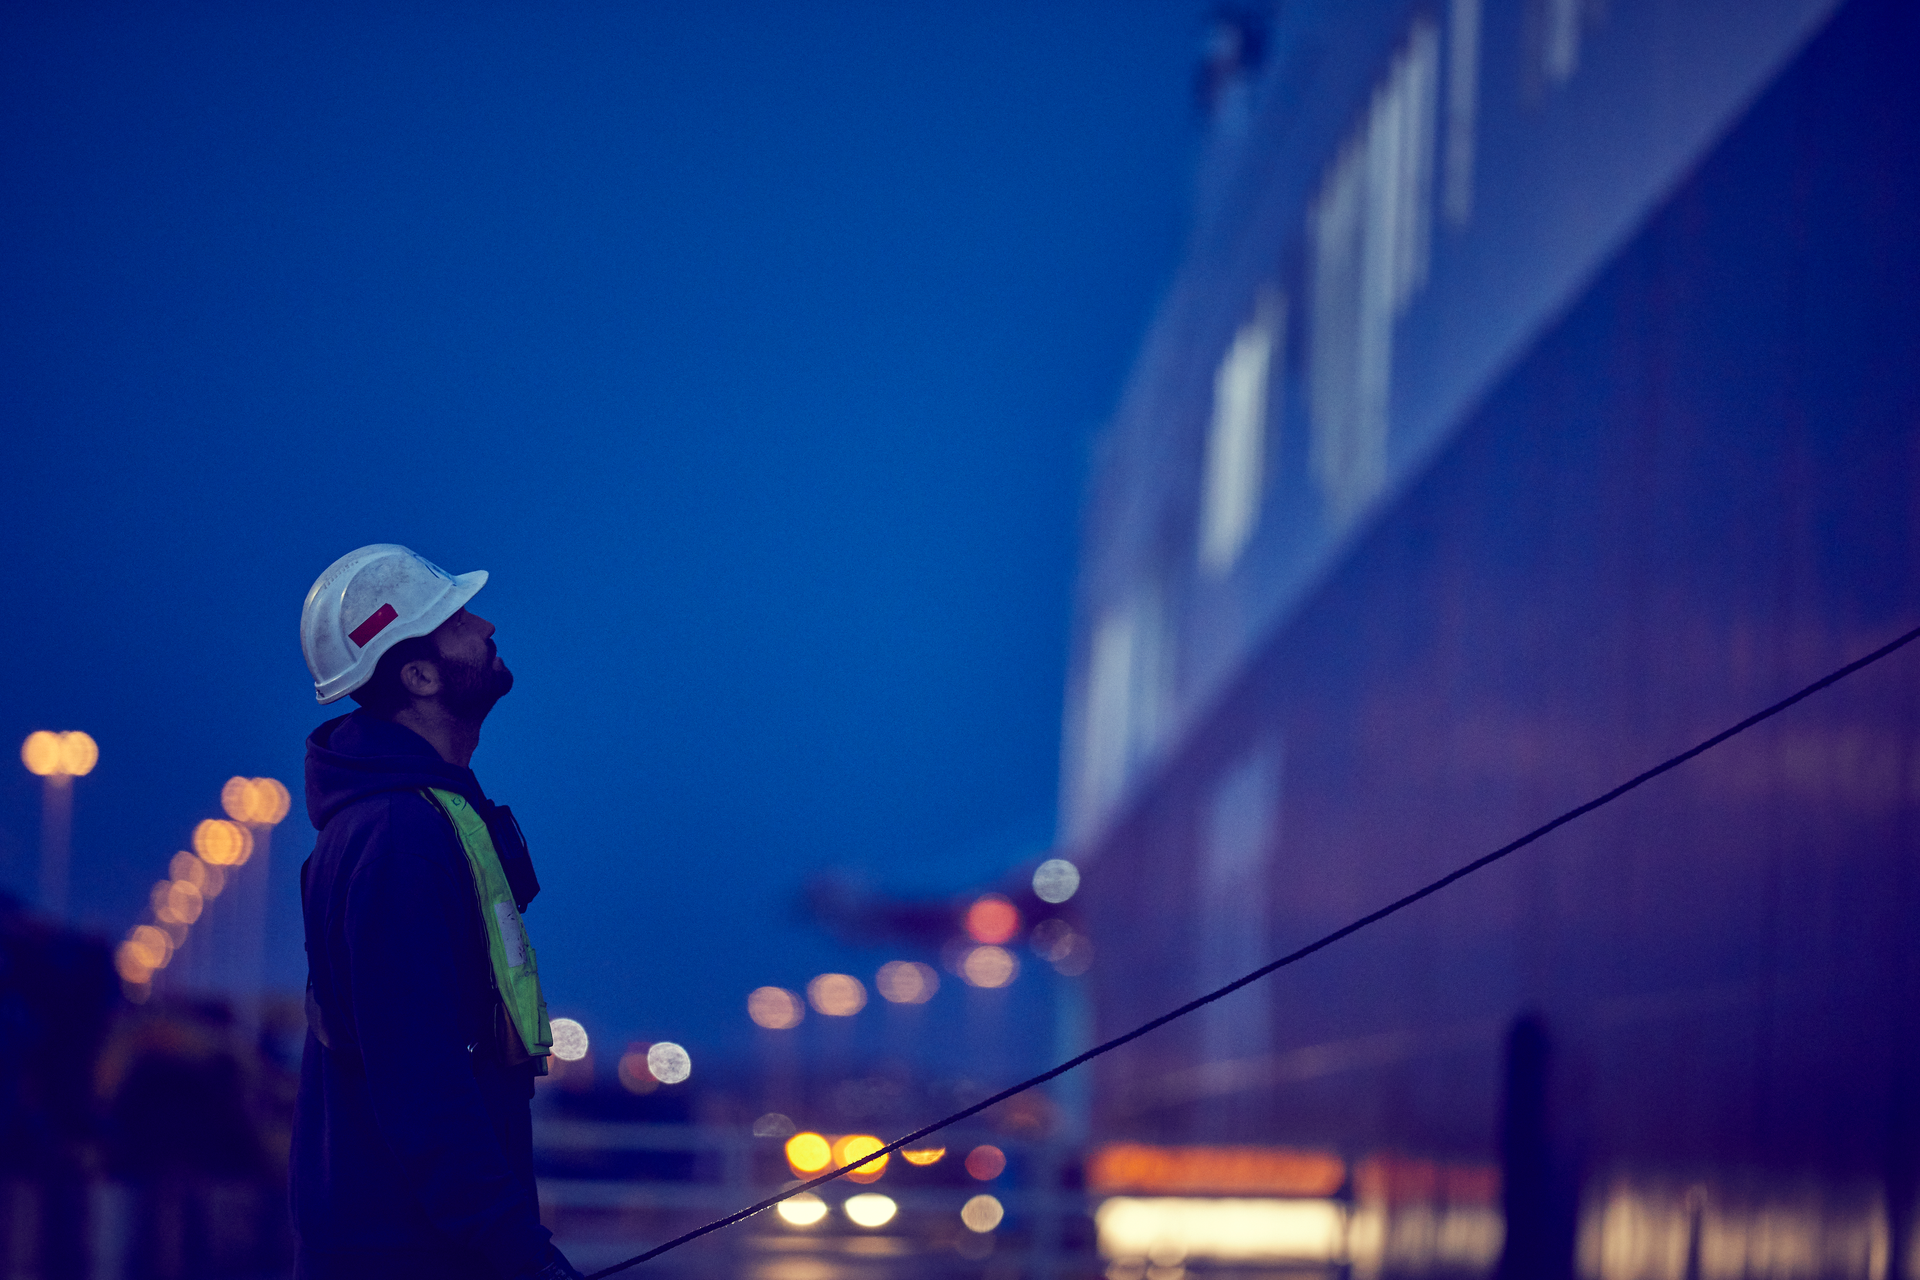 DFDS employee looking up at night time